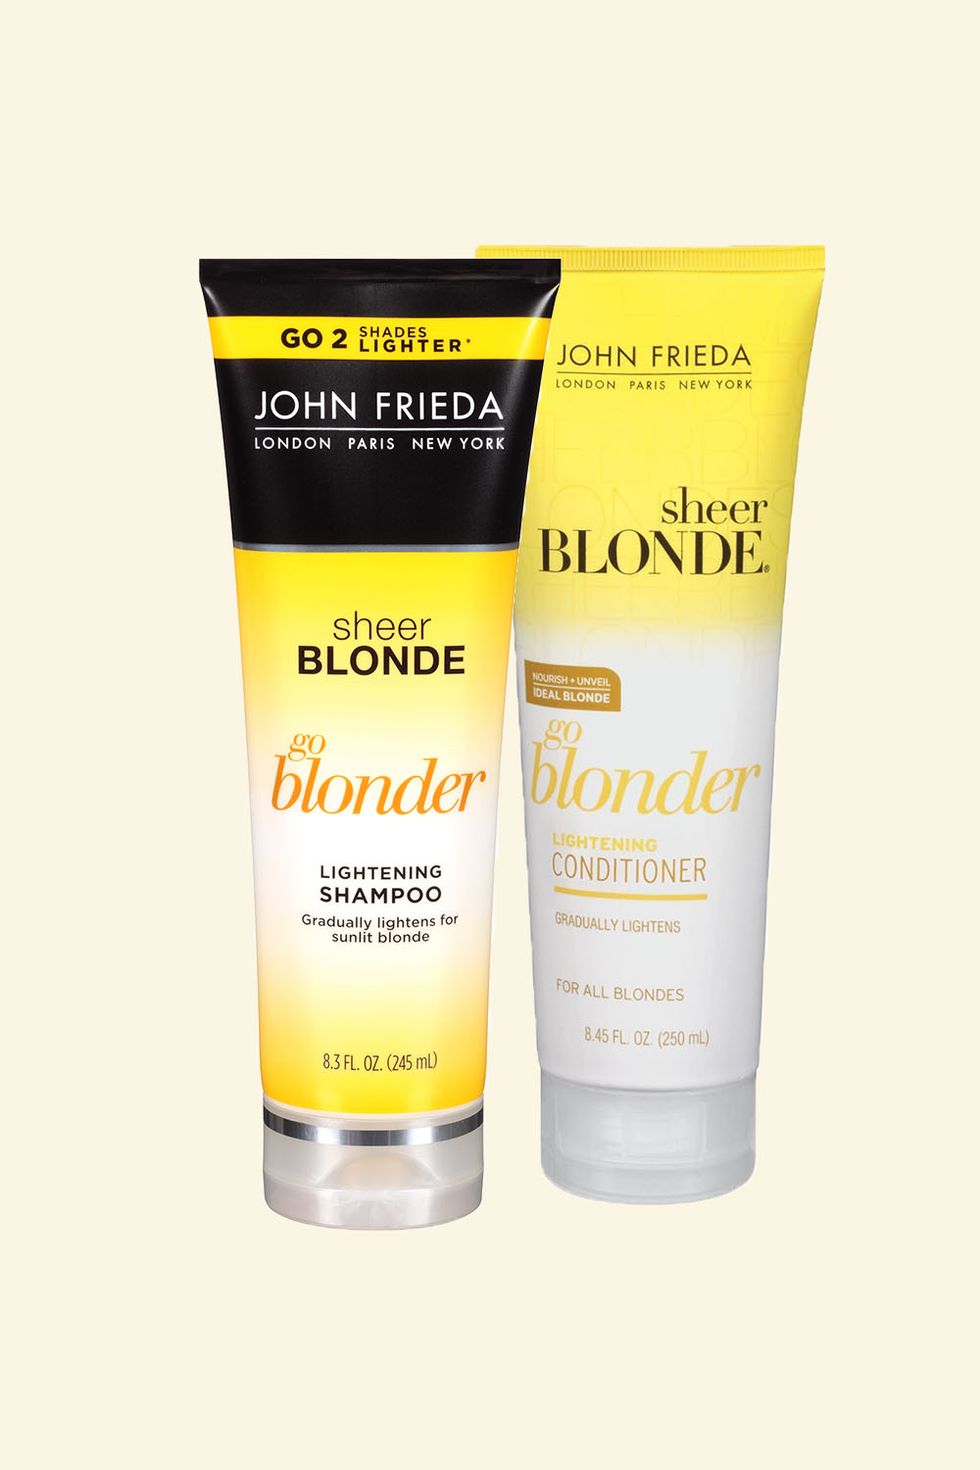 <p>Hadid swears by this highlight-enhancing duo, which contains a natural lightening complex that *gently* reduces color pigments. Also, it makes your hair feel really soft.</p>

<p></p>

<p>John Frieda Sheer Blonde Go Blonder Lightening Shampoo, $9.99; <a href="http://bit.ly/2eTtv22" target="_blank" data-tracking-id="recirc-text-link">ulta.com</a>.</p>

<p><span data-redactor-tag="span"></span>John Frieda Sheer Blonde Go Blonder Lightening Conditioner, $9.99; <a href="http://bit.ly/2eTr2EN" target="_blank" data-tracking-id="recirc-text-link">ulta.com</a>.</p>